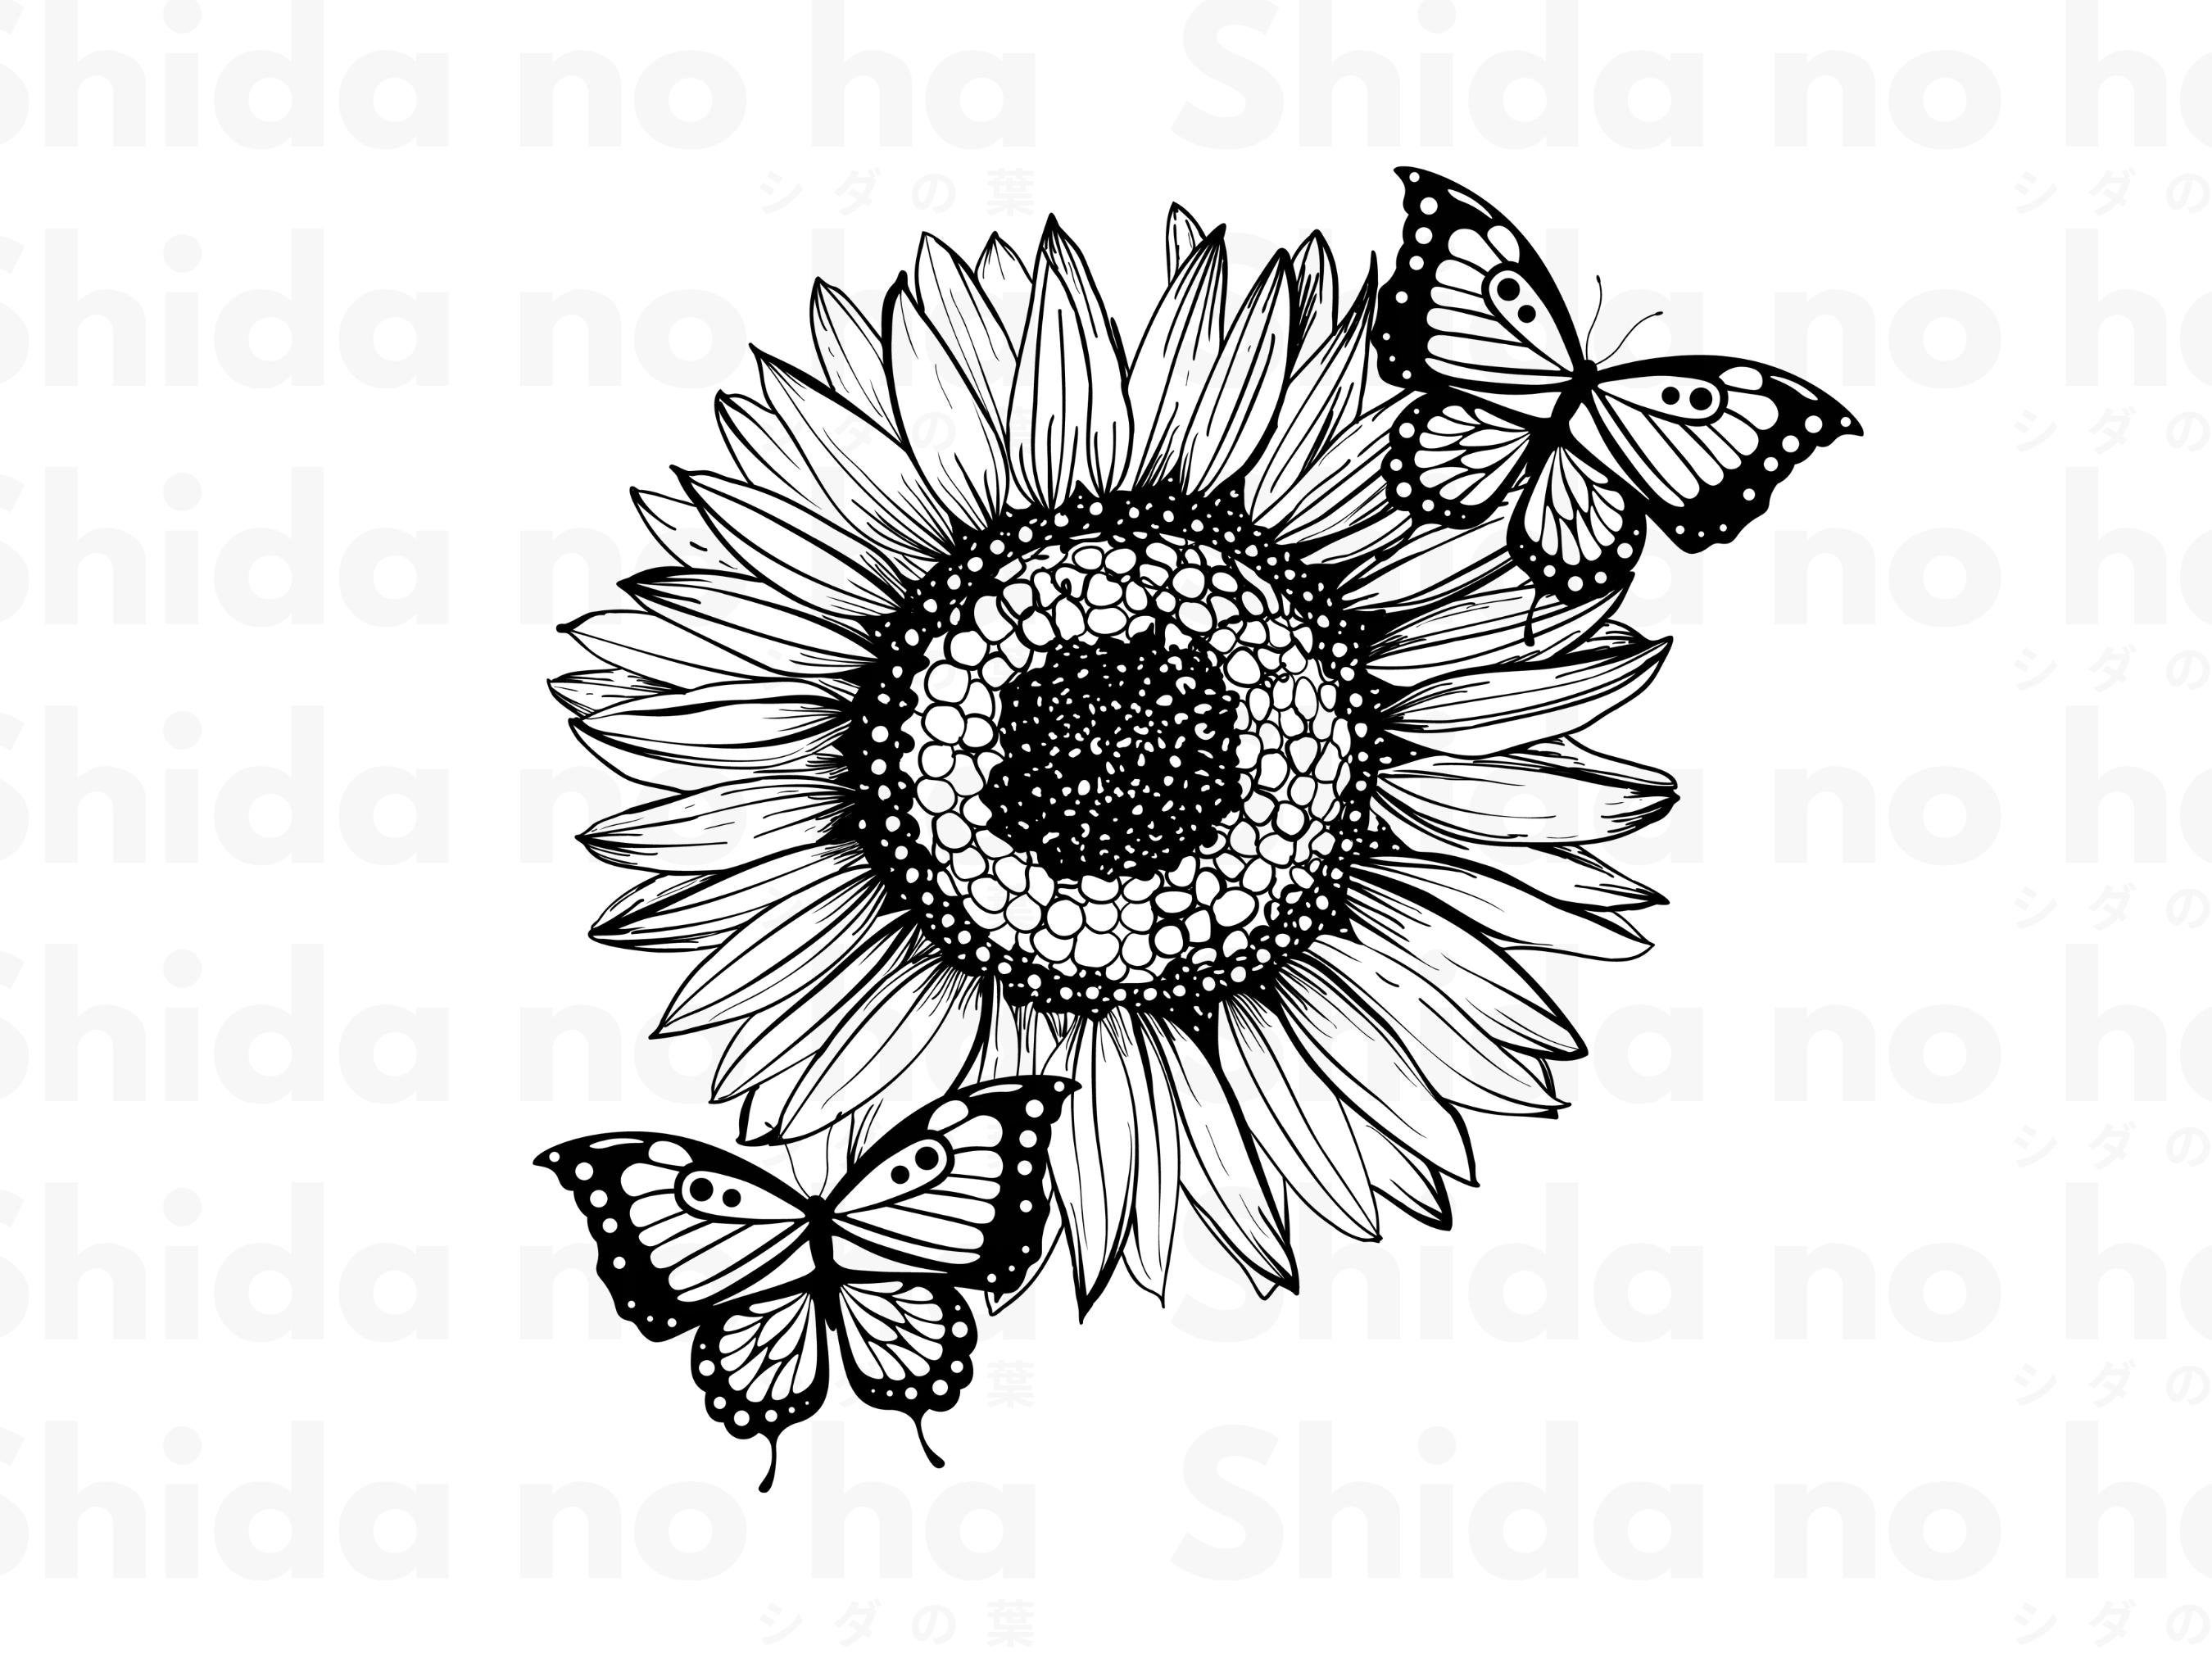 Sunflower Butterfly SVG, sunflowers svg, butterfly svg, Digital Download,  Cricut, Silhouette, Glowforge (includes svg/png/dxf/eps files)